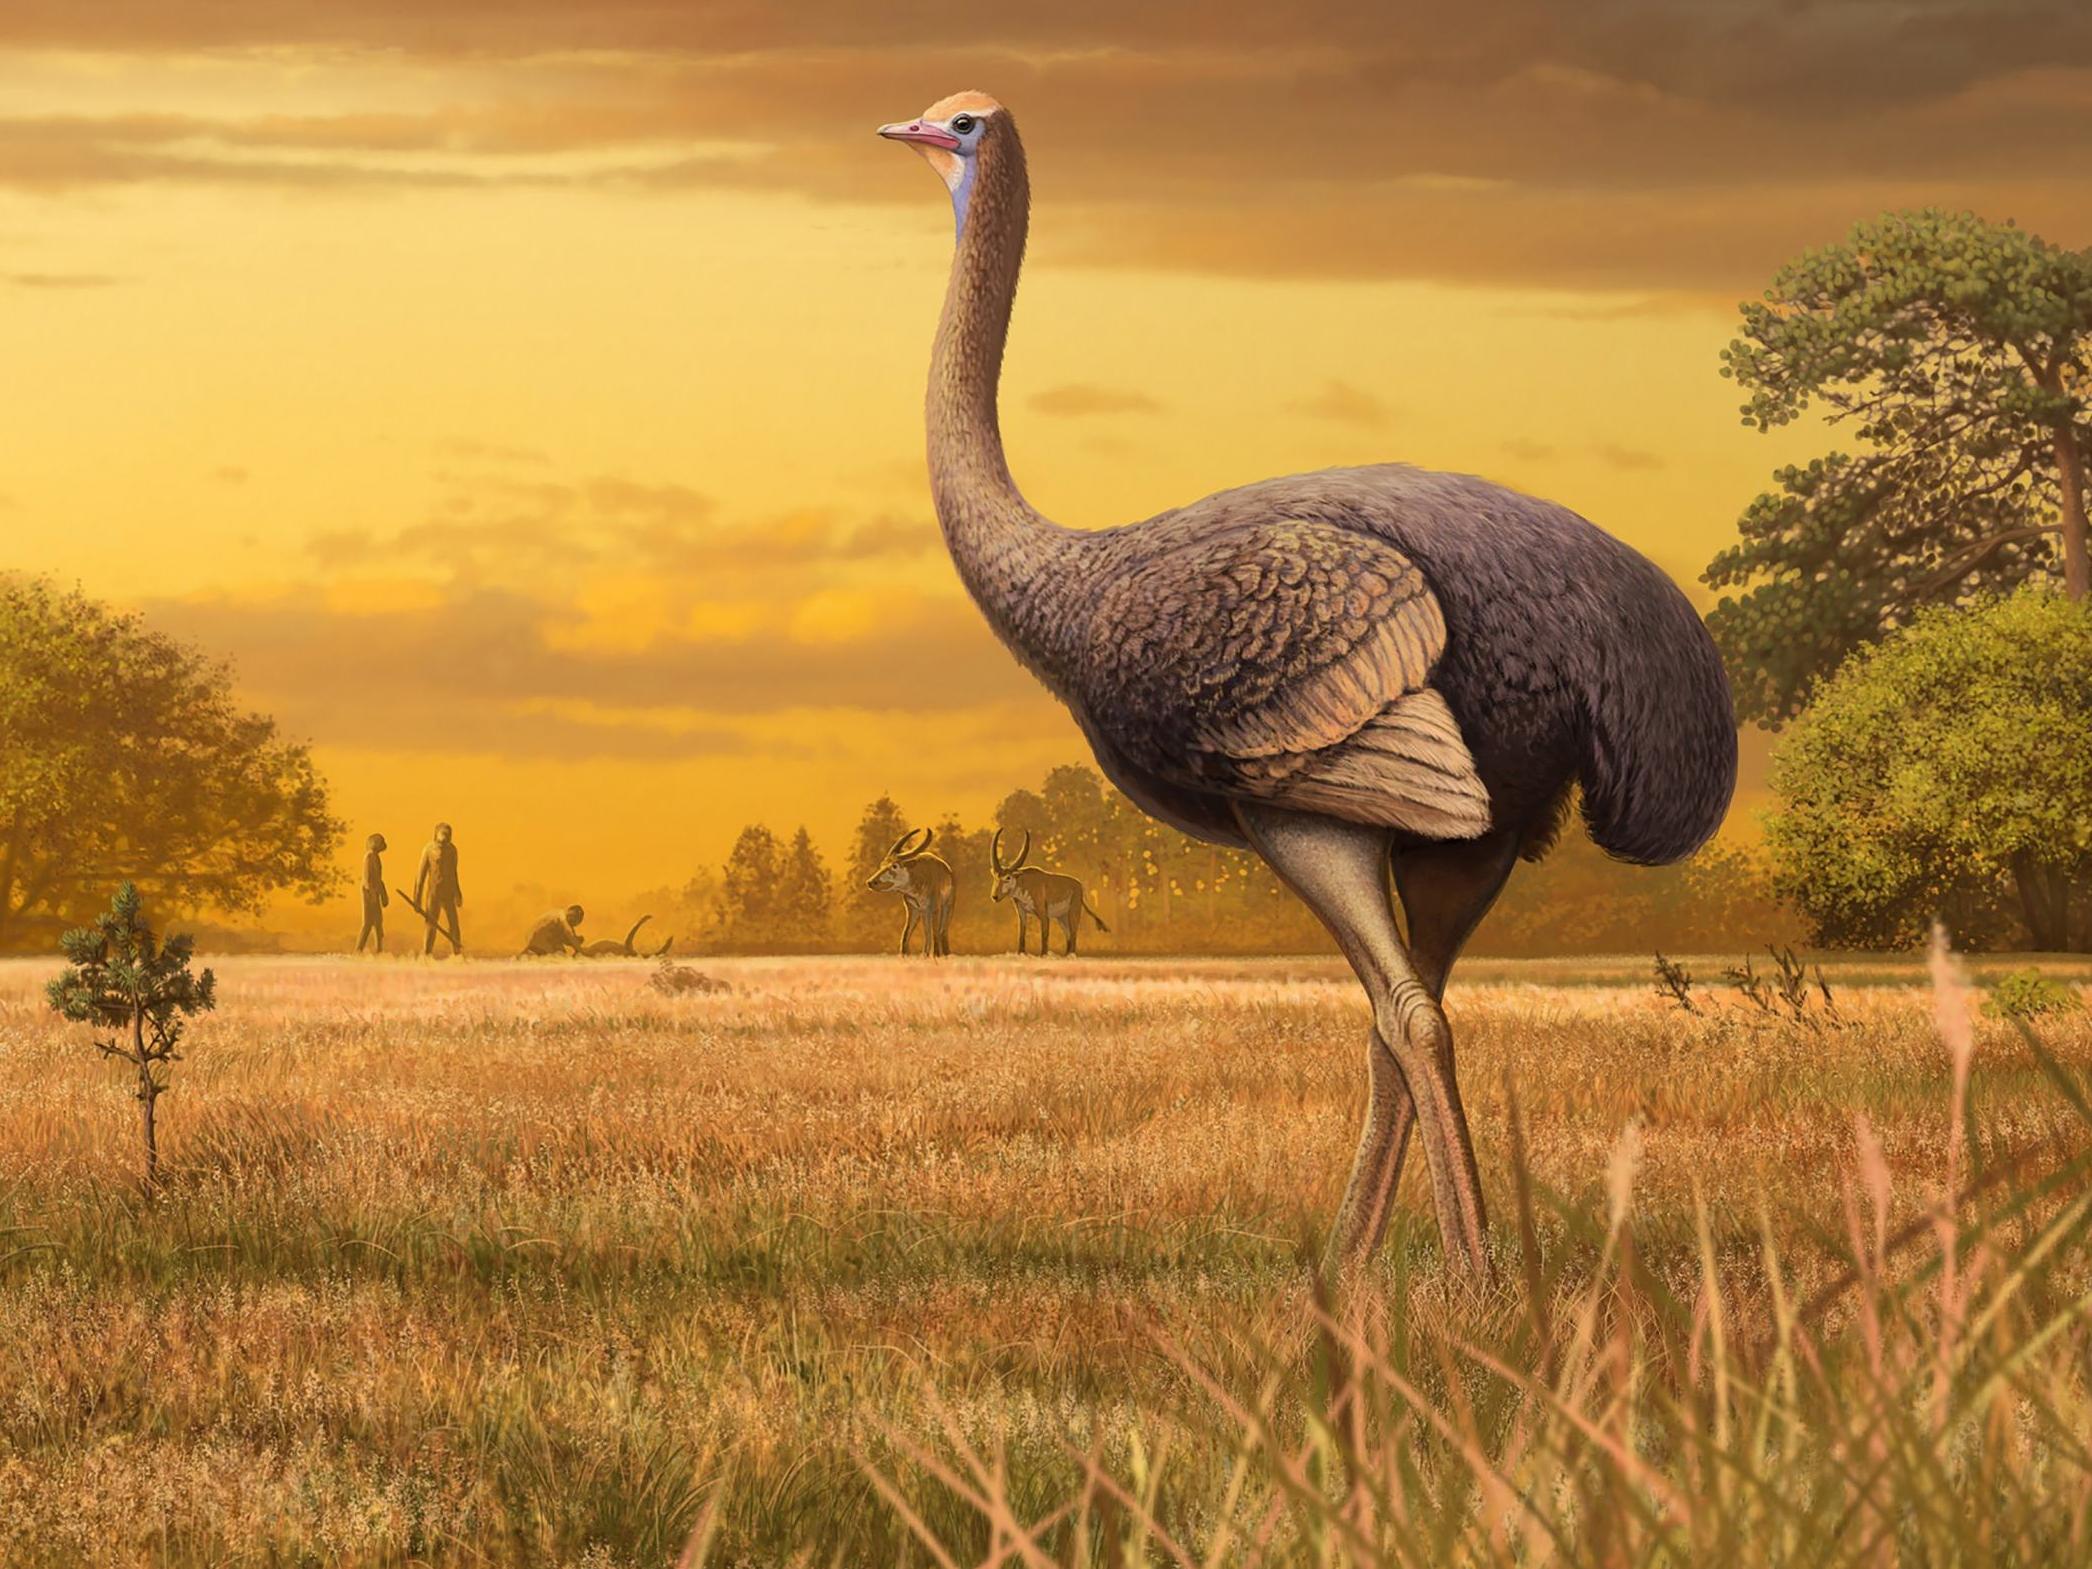 The 450kg flightless bird (artist's impression) may have been a source of meat, bones, feathers and eggshells for early humans